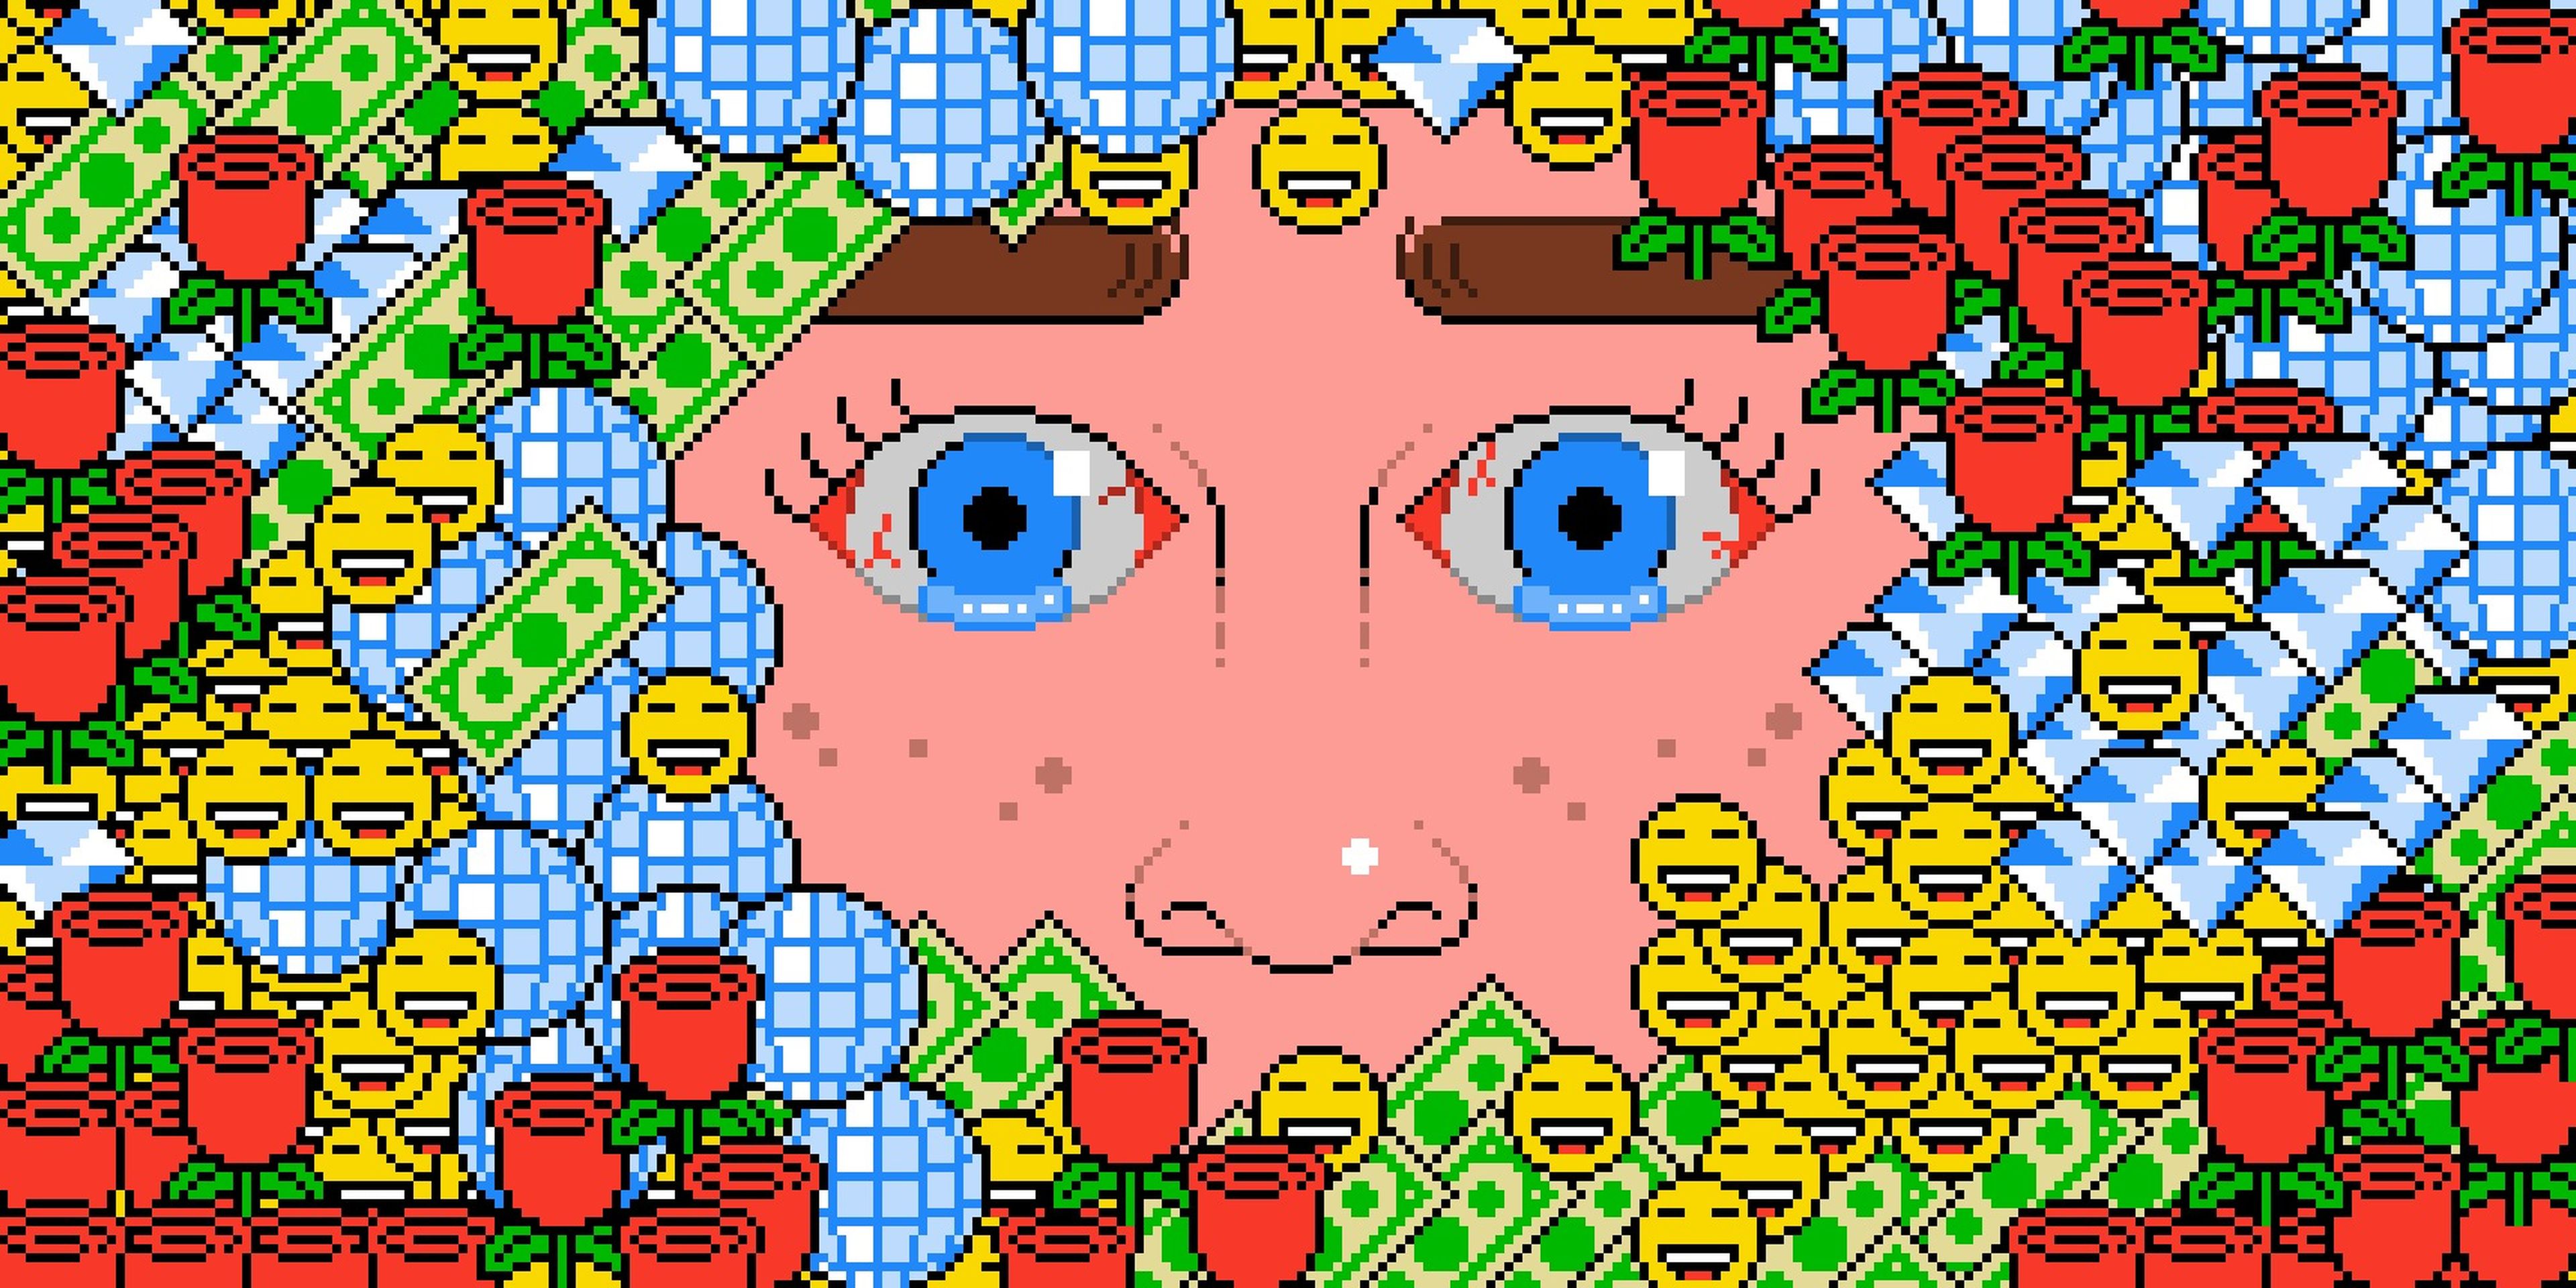 A face with watering, strained eyes is obscured by floating emojis of happy faces, dollar bills, disco balls, roses, and diamonds.